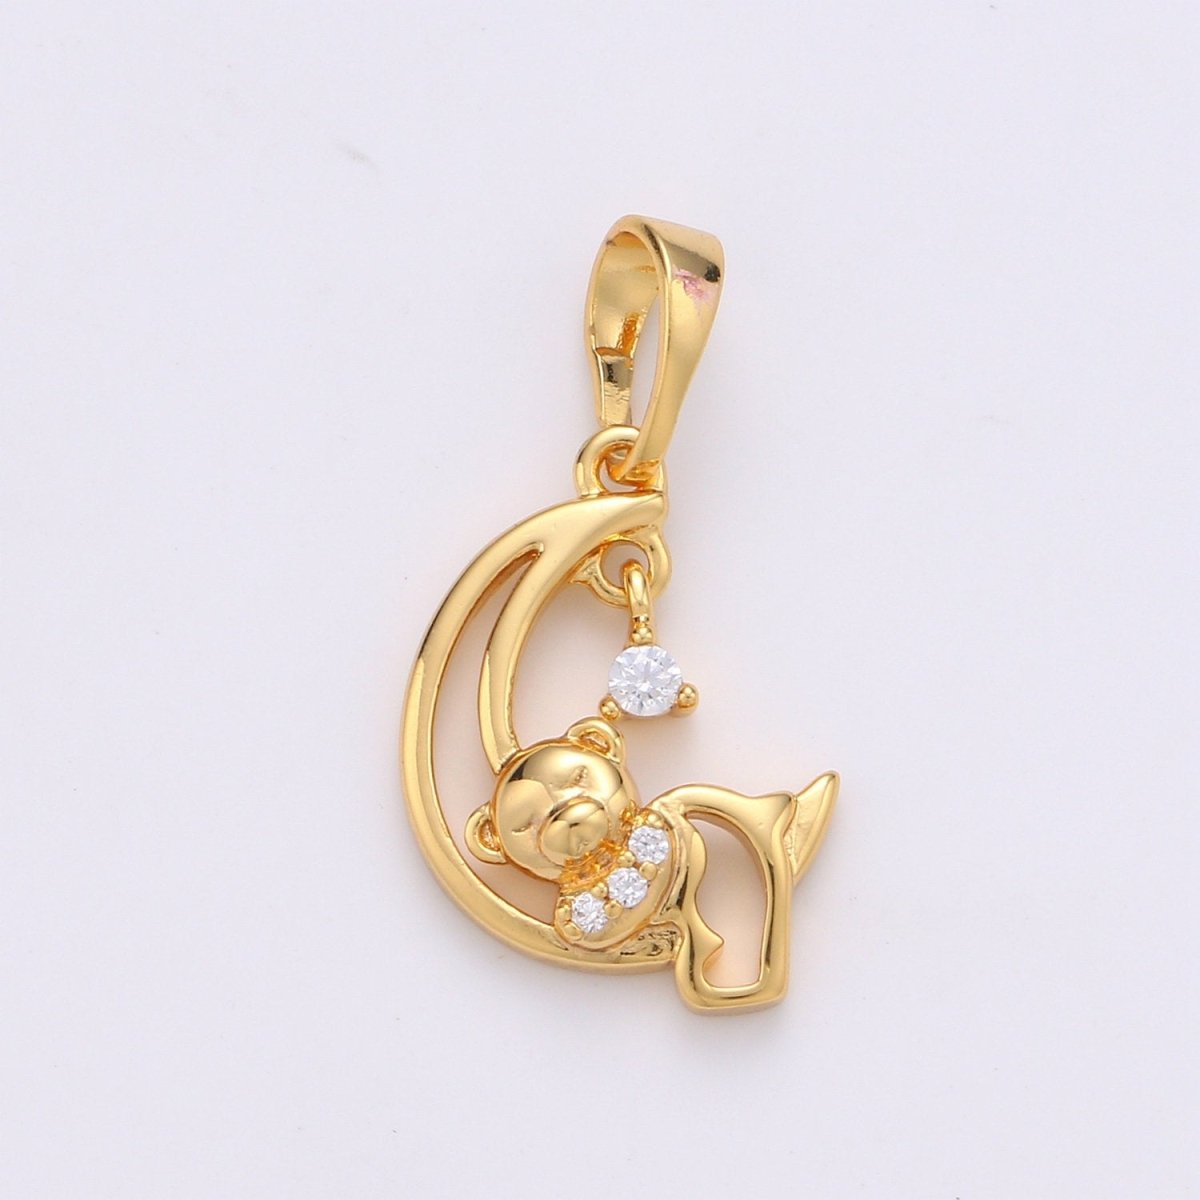 24k Gold Filled Charm Sleeping Teddy Bear On Crescent Moon with Cz Micro Pave Charms for Kids Daughter Necklace Christmas Jewelry Gift IDea J-081 - DLUXCA